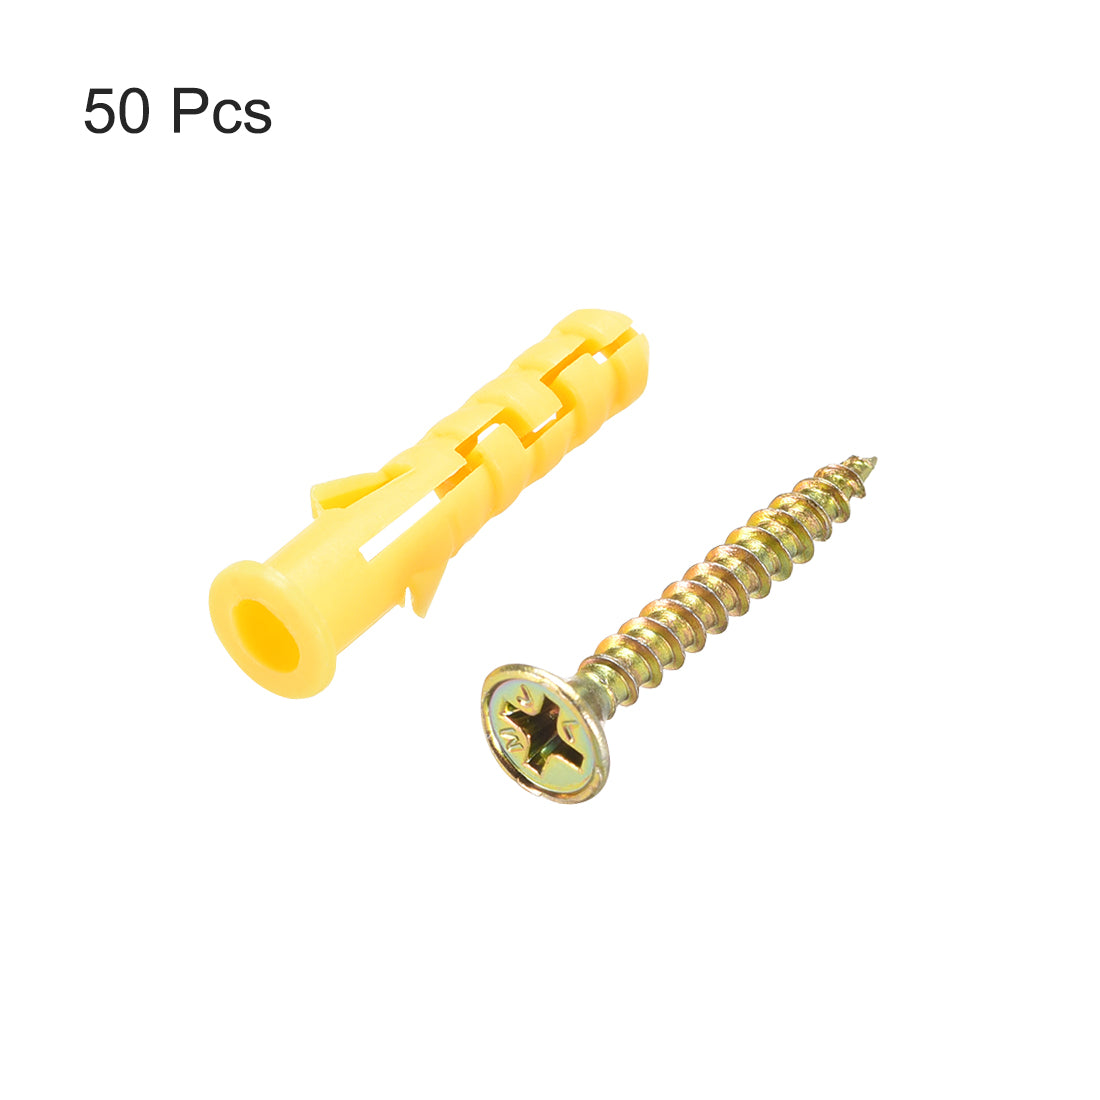 uxcell Uxcell 6mmx30mm Plastic Expansion Tube for Drywall with Screws Yellow 50pcs